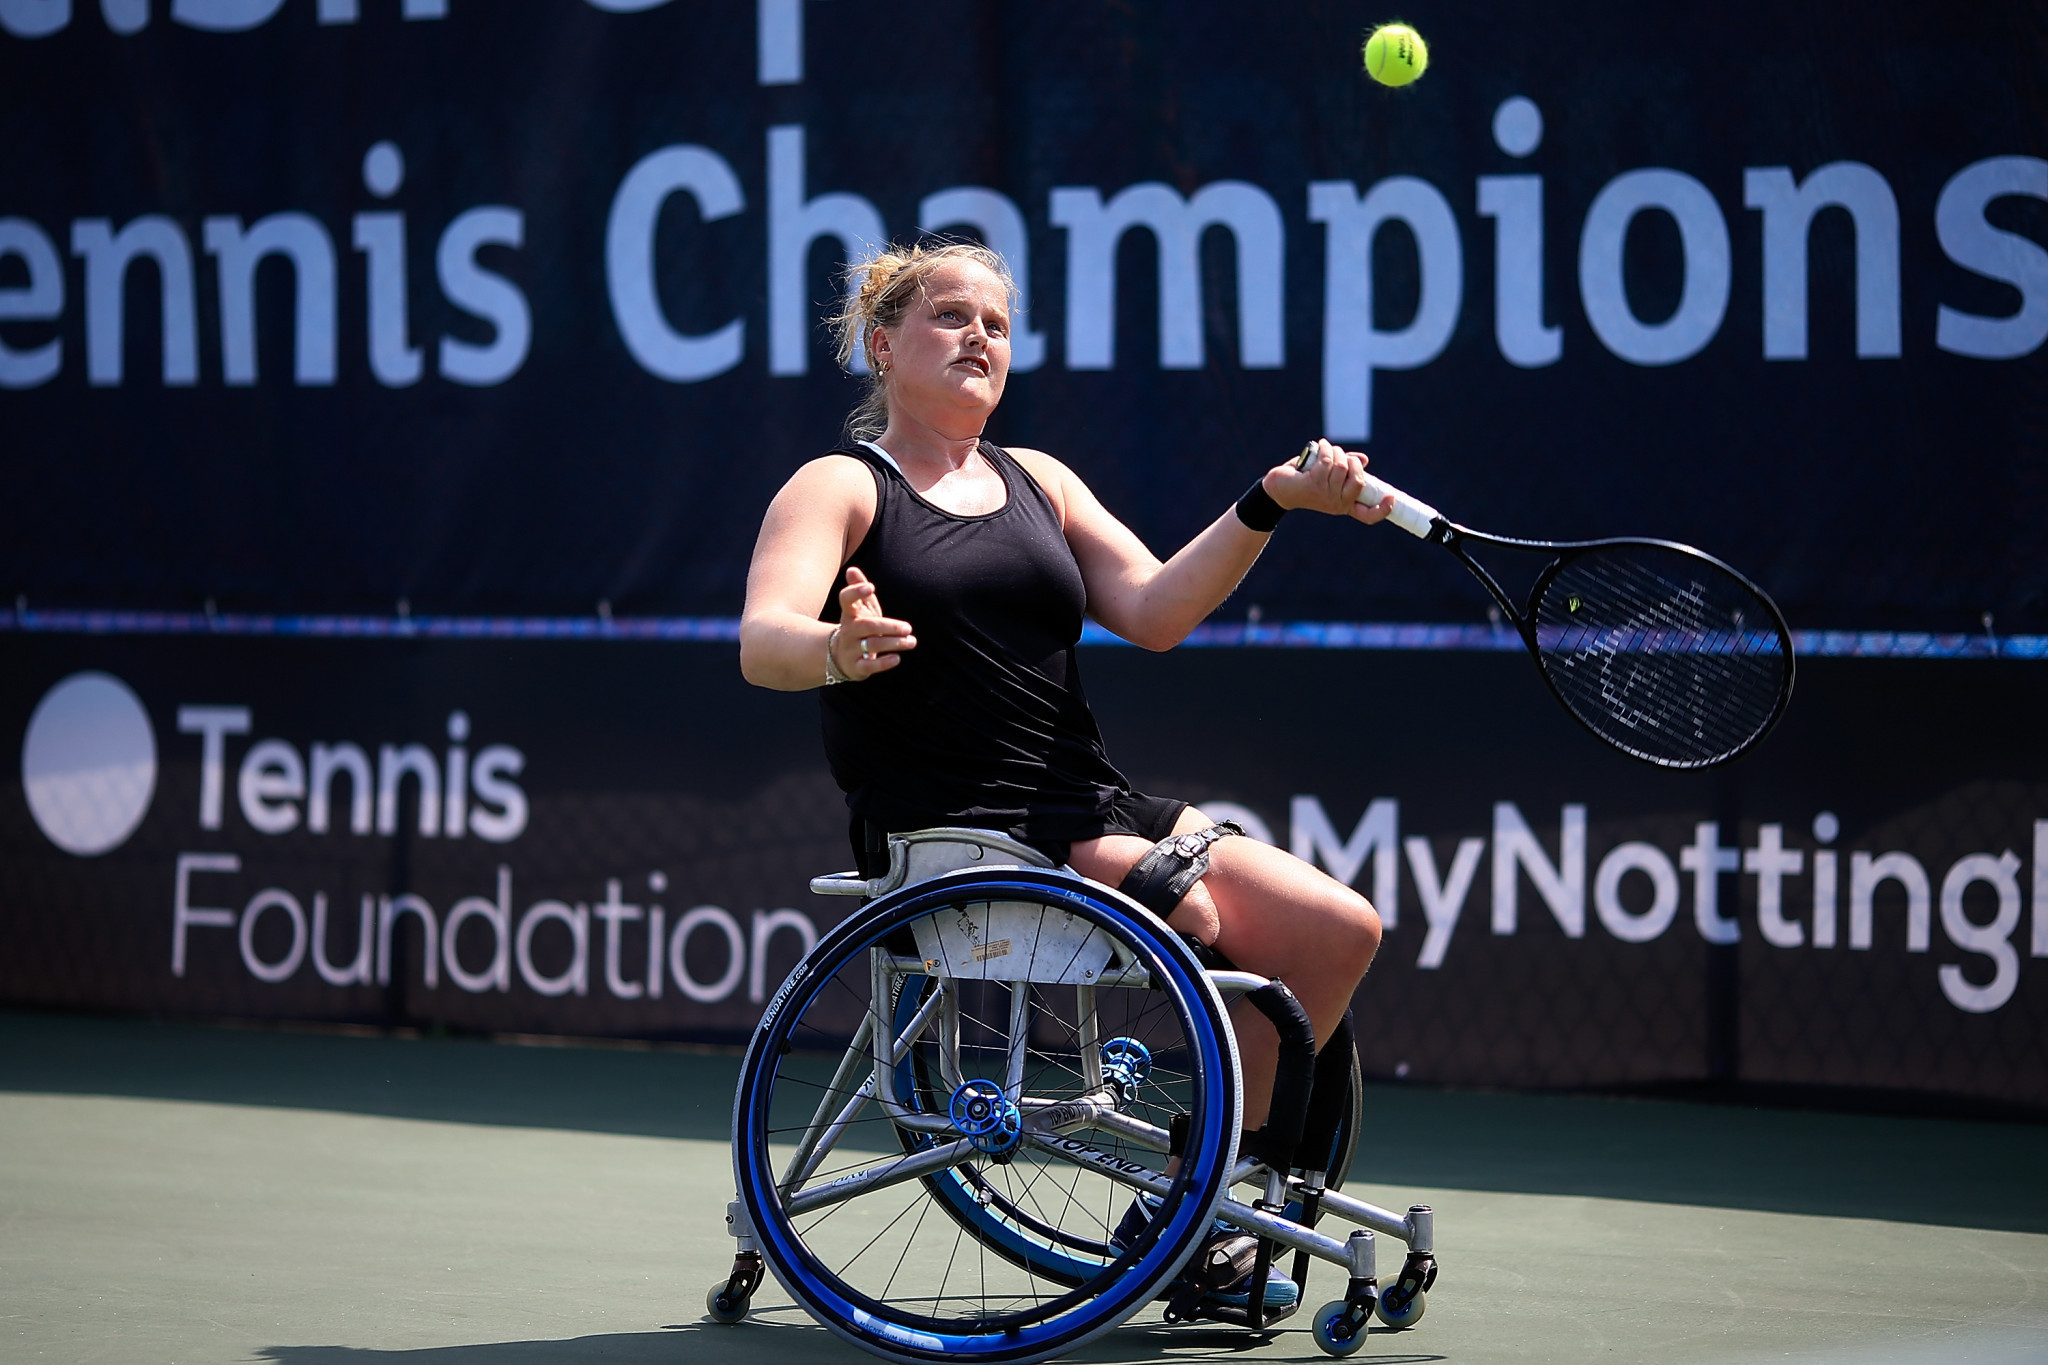 Second seed Van Koot secures quarter-final place on opening day of Bendigo Wheelchair Tennis Open